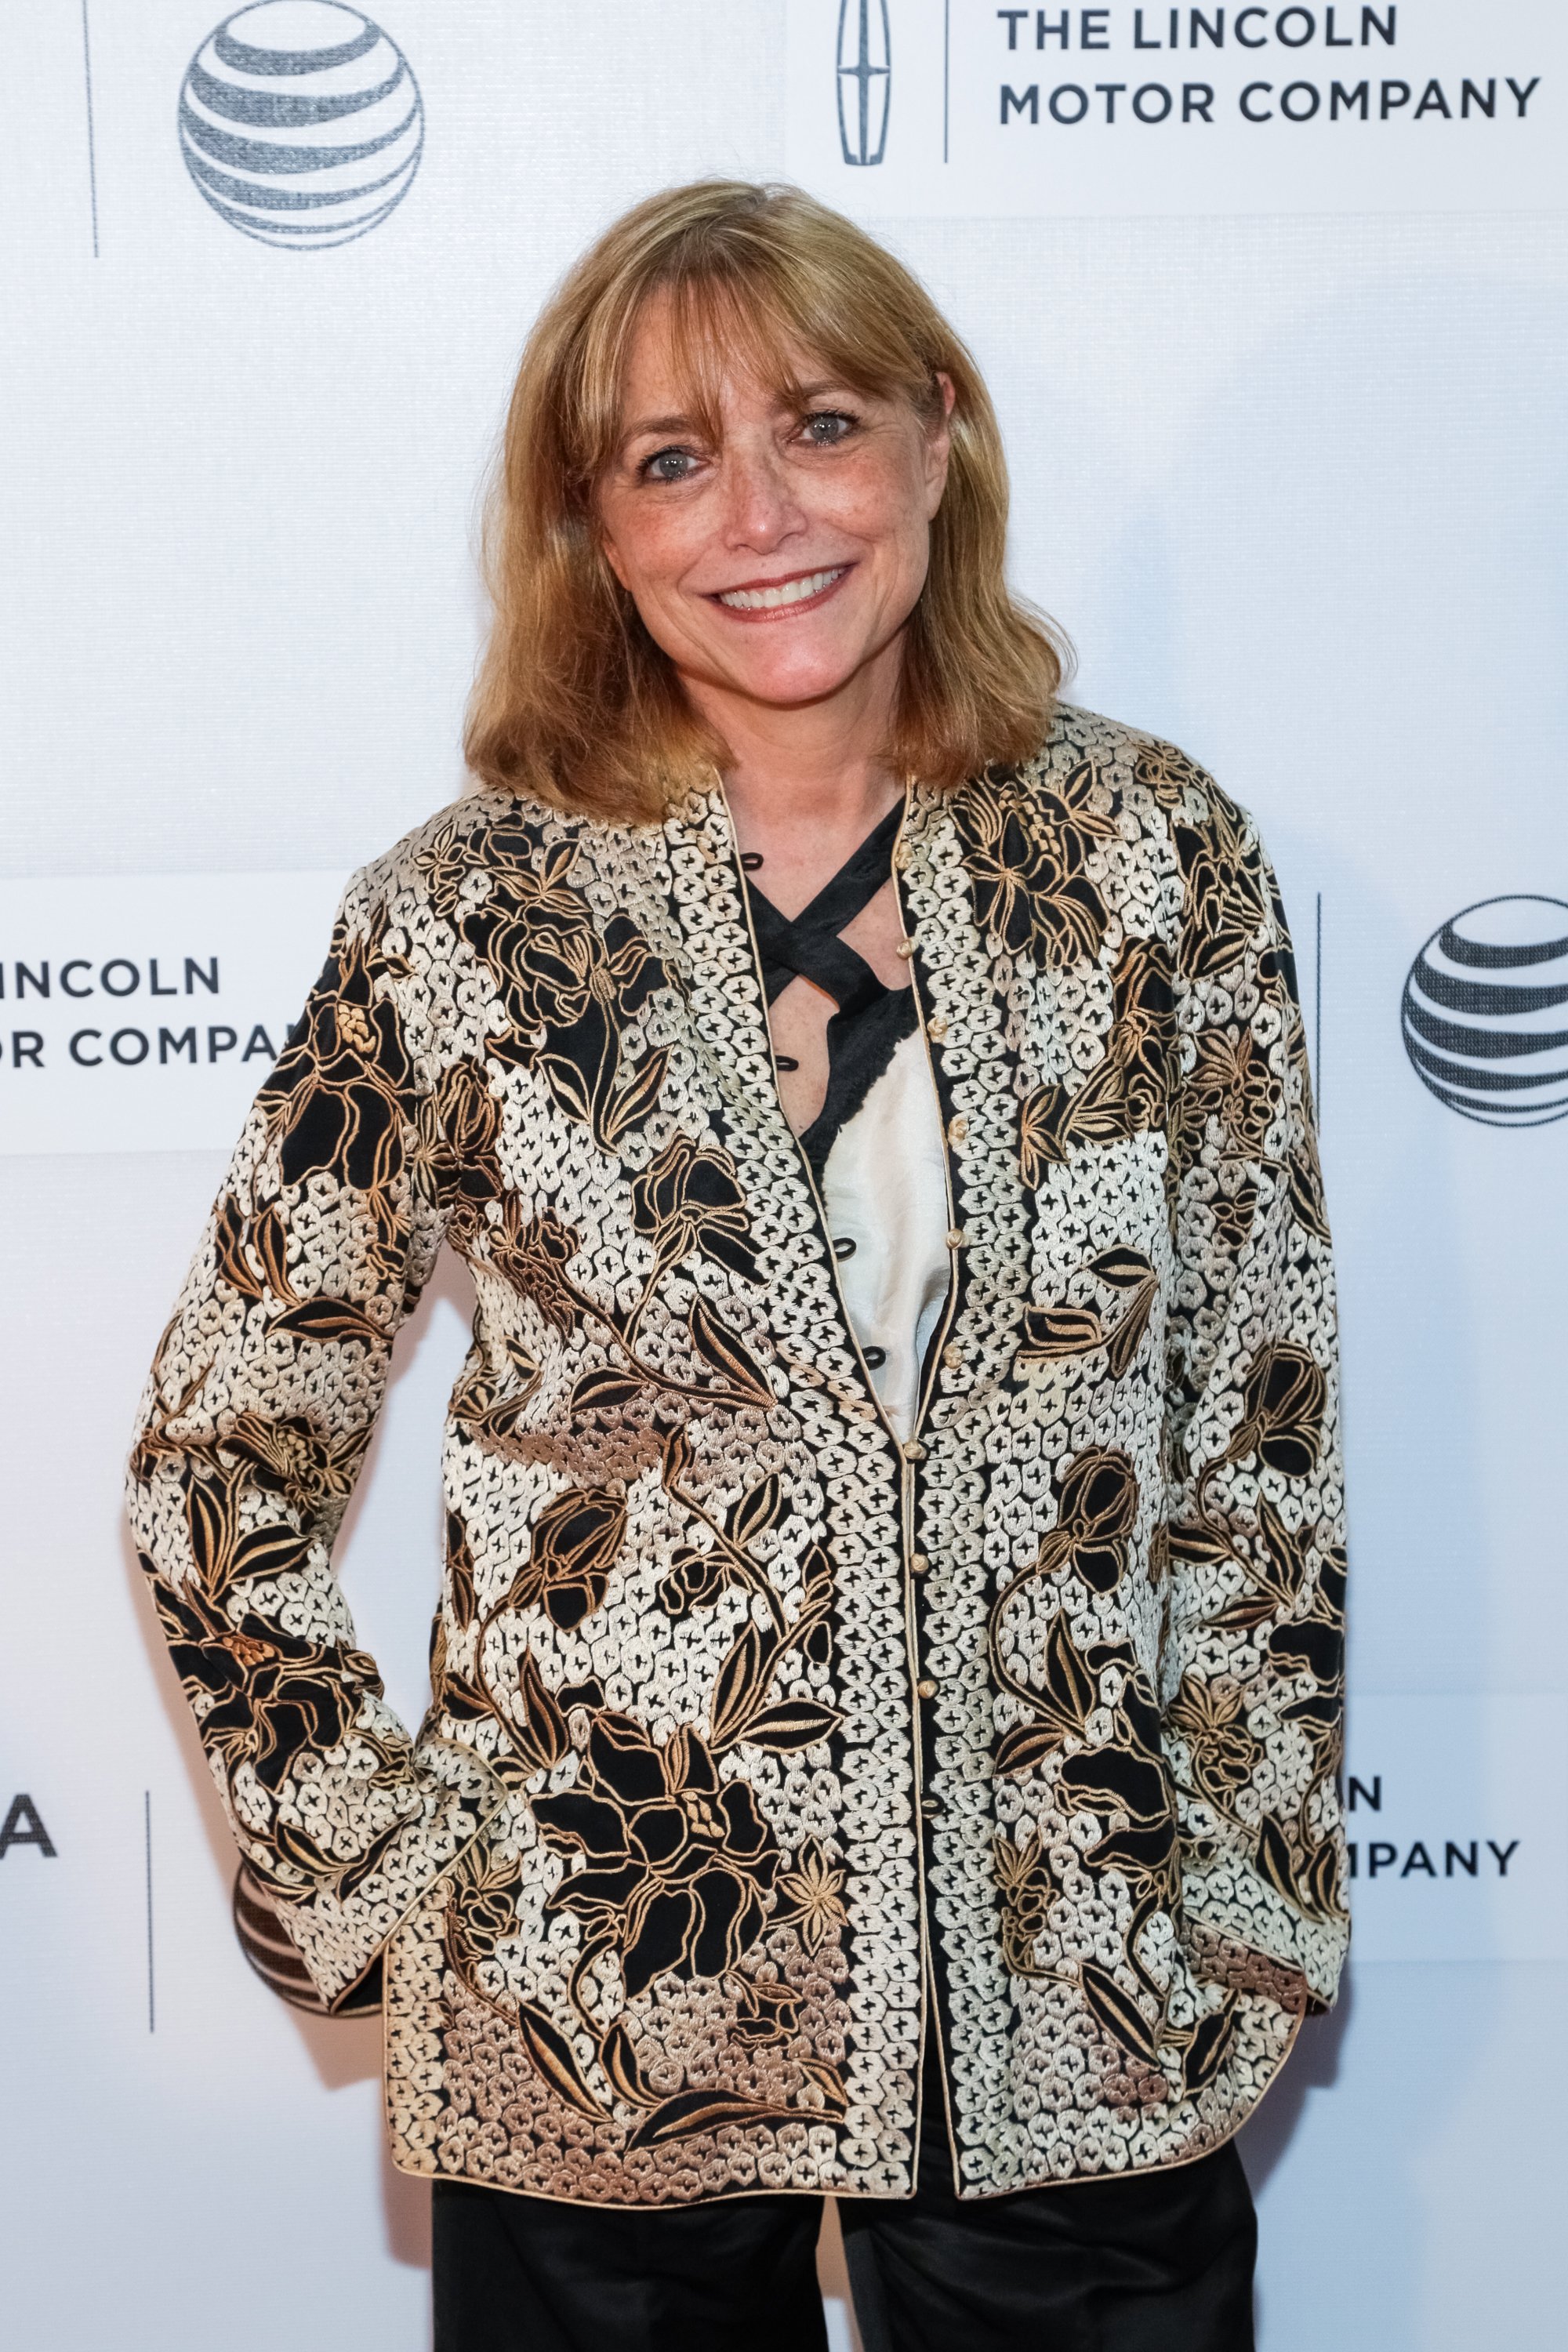 Karen Allen arrives for the premiere of "Bad Hurt" during the 2015 Tribeca Film Festival held at Regal Battery Park 11 on April 20, 2015 in New York City. | Source: Getty Images